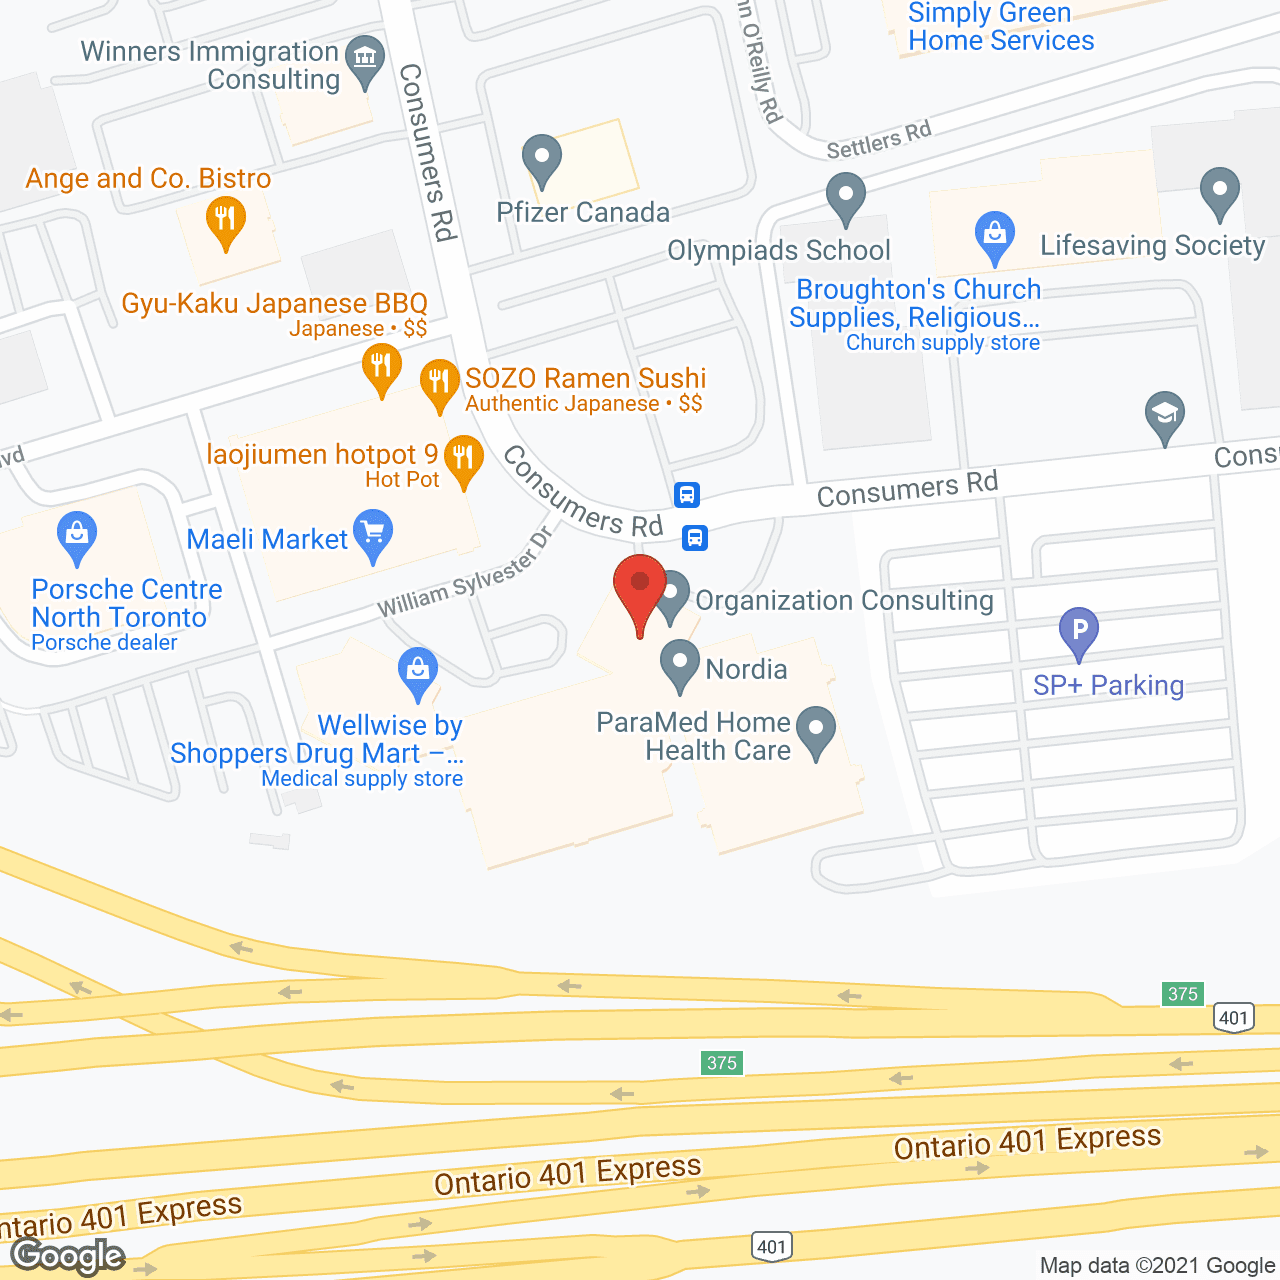 Here to Care for Seniors - Toronto in google map